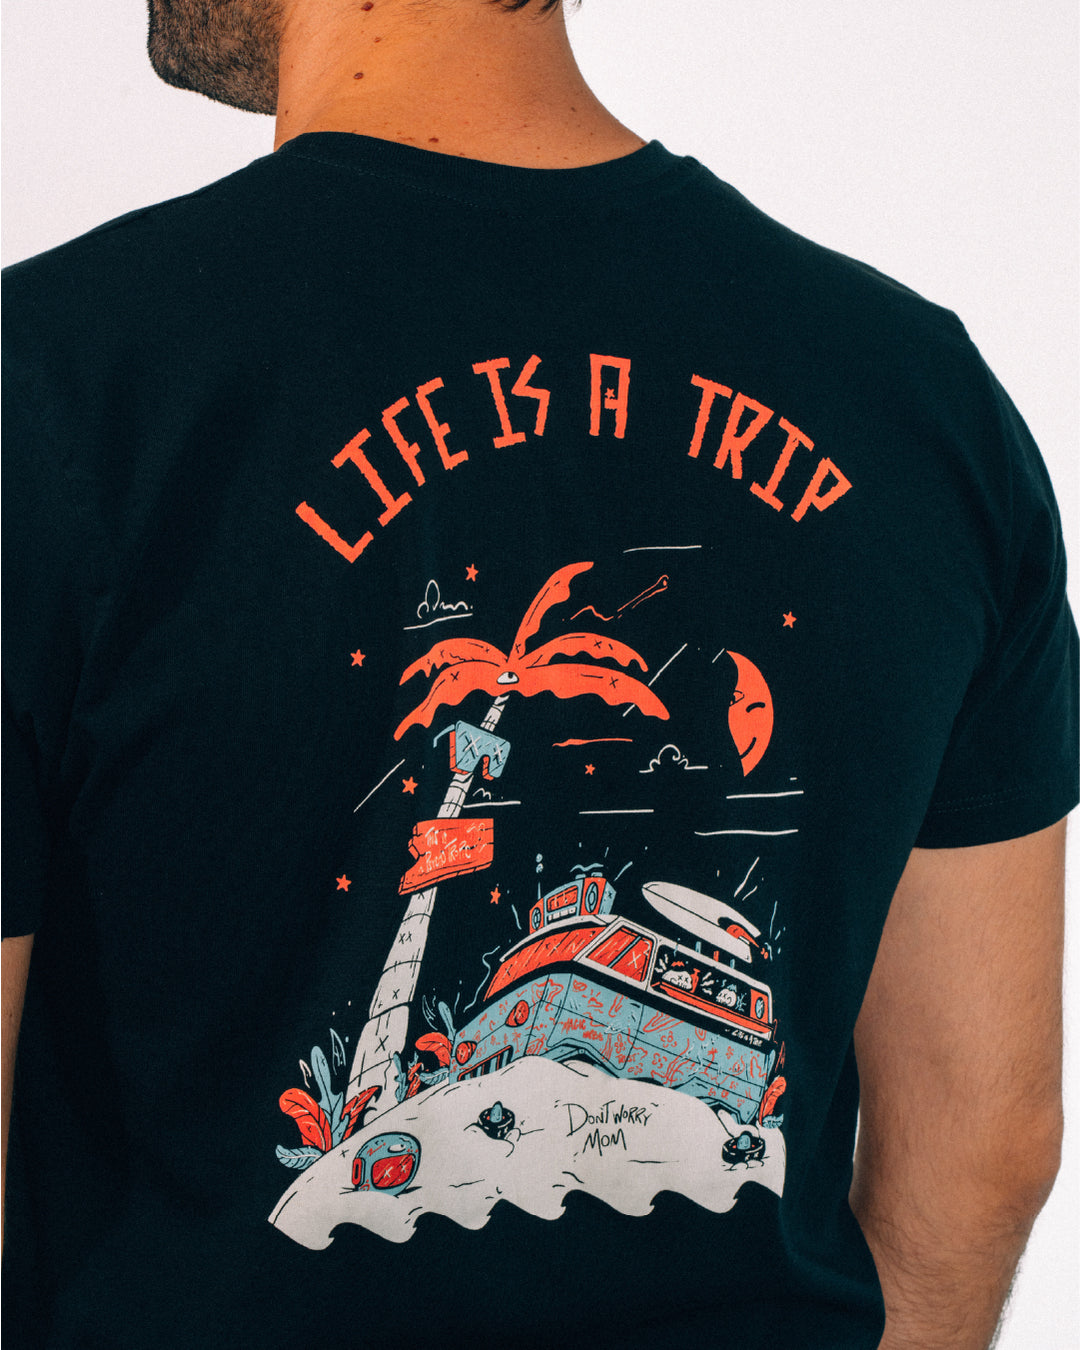 Life is a trip t-shirt (2.0)